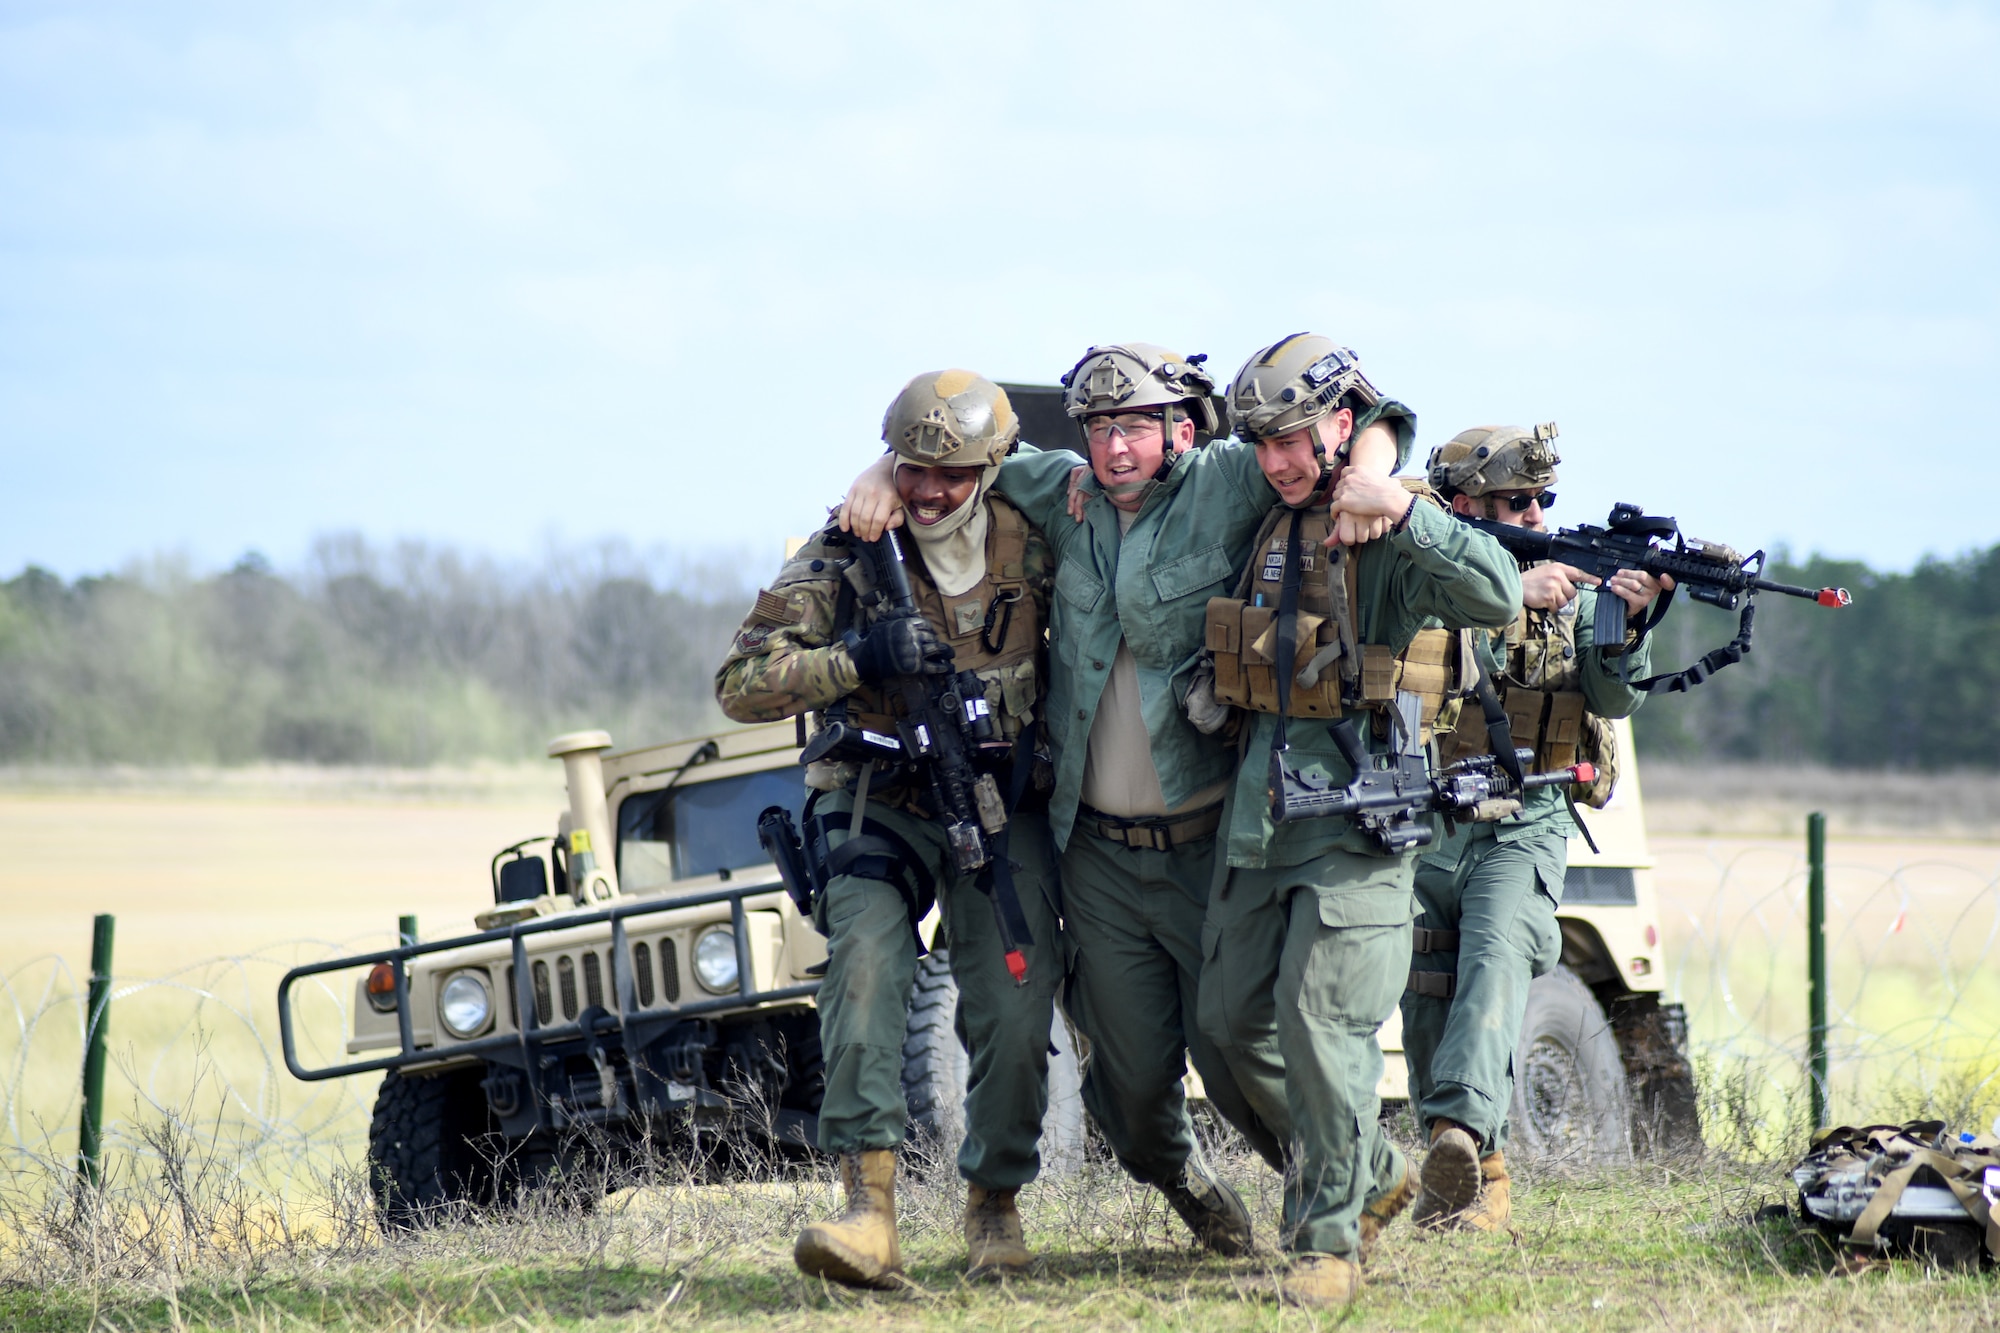 Contingency Response Forces assigned to the 821st Contingency Response Group out of Travis Air Force Base, Calif., assist a wounded victim during a simulated gunfire attack at the Geronimo Landing Zone during a mission in support of Green Flag Little Rock exercise, Feb. 14, 2019, Fort Polk, La. The primary objective of the exercise is to support the Joint Readiness Training Center and provide the maximum number of airlift crews, mission planners and ground support elements to a simulated combat environment with emphasis on joint force integration. (U.S. Air Force photo by Tech. Sgt. Liliana Moreno)